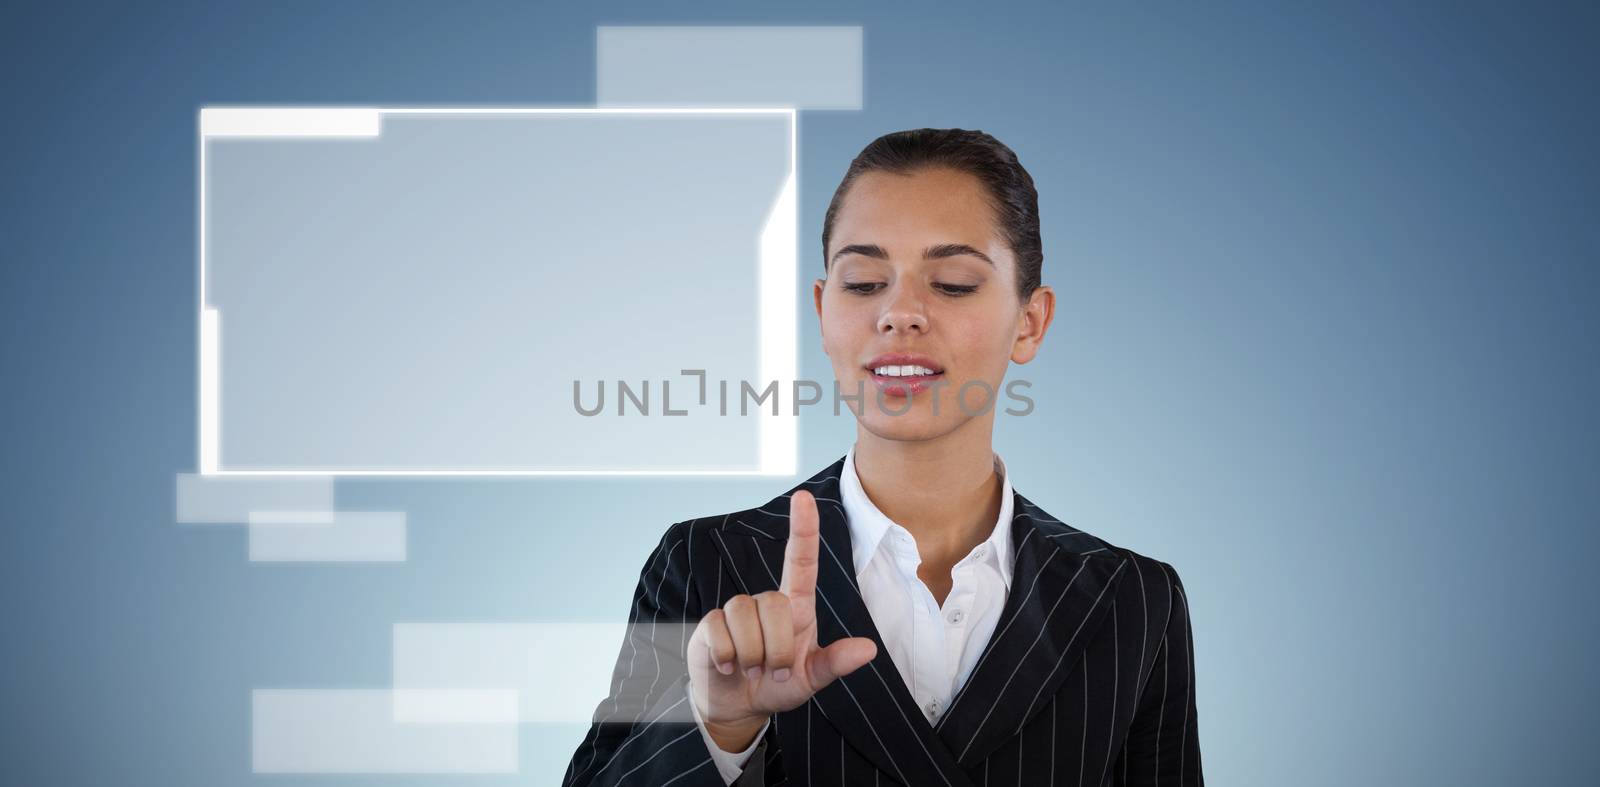 Businesswoman in suit touching invisible interface against abstract blue background